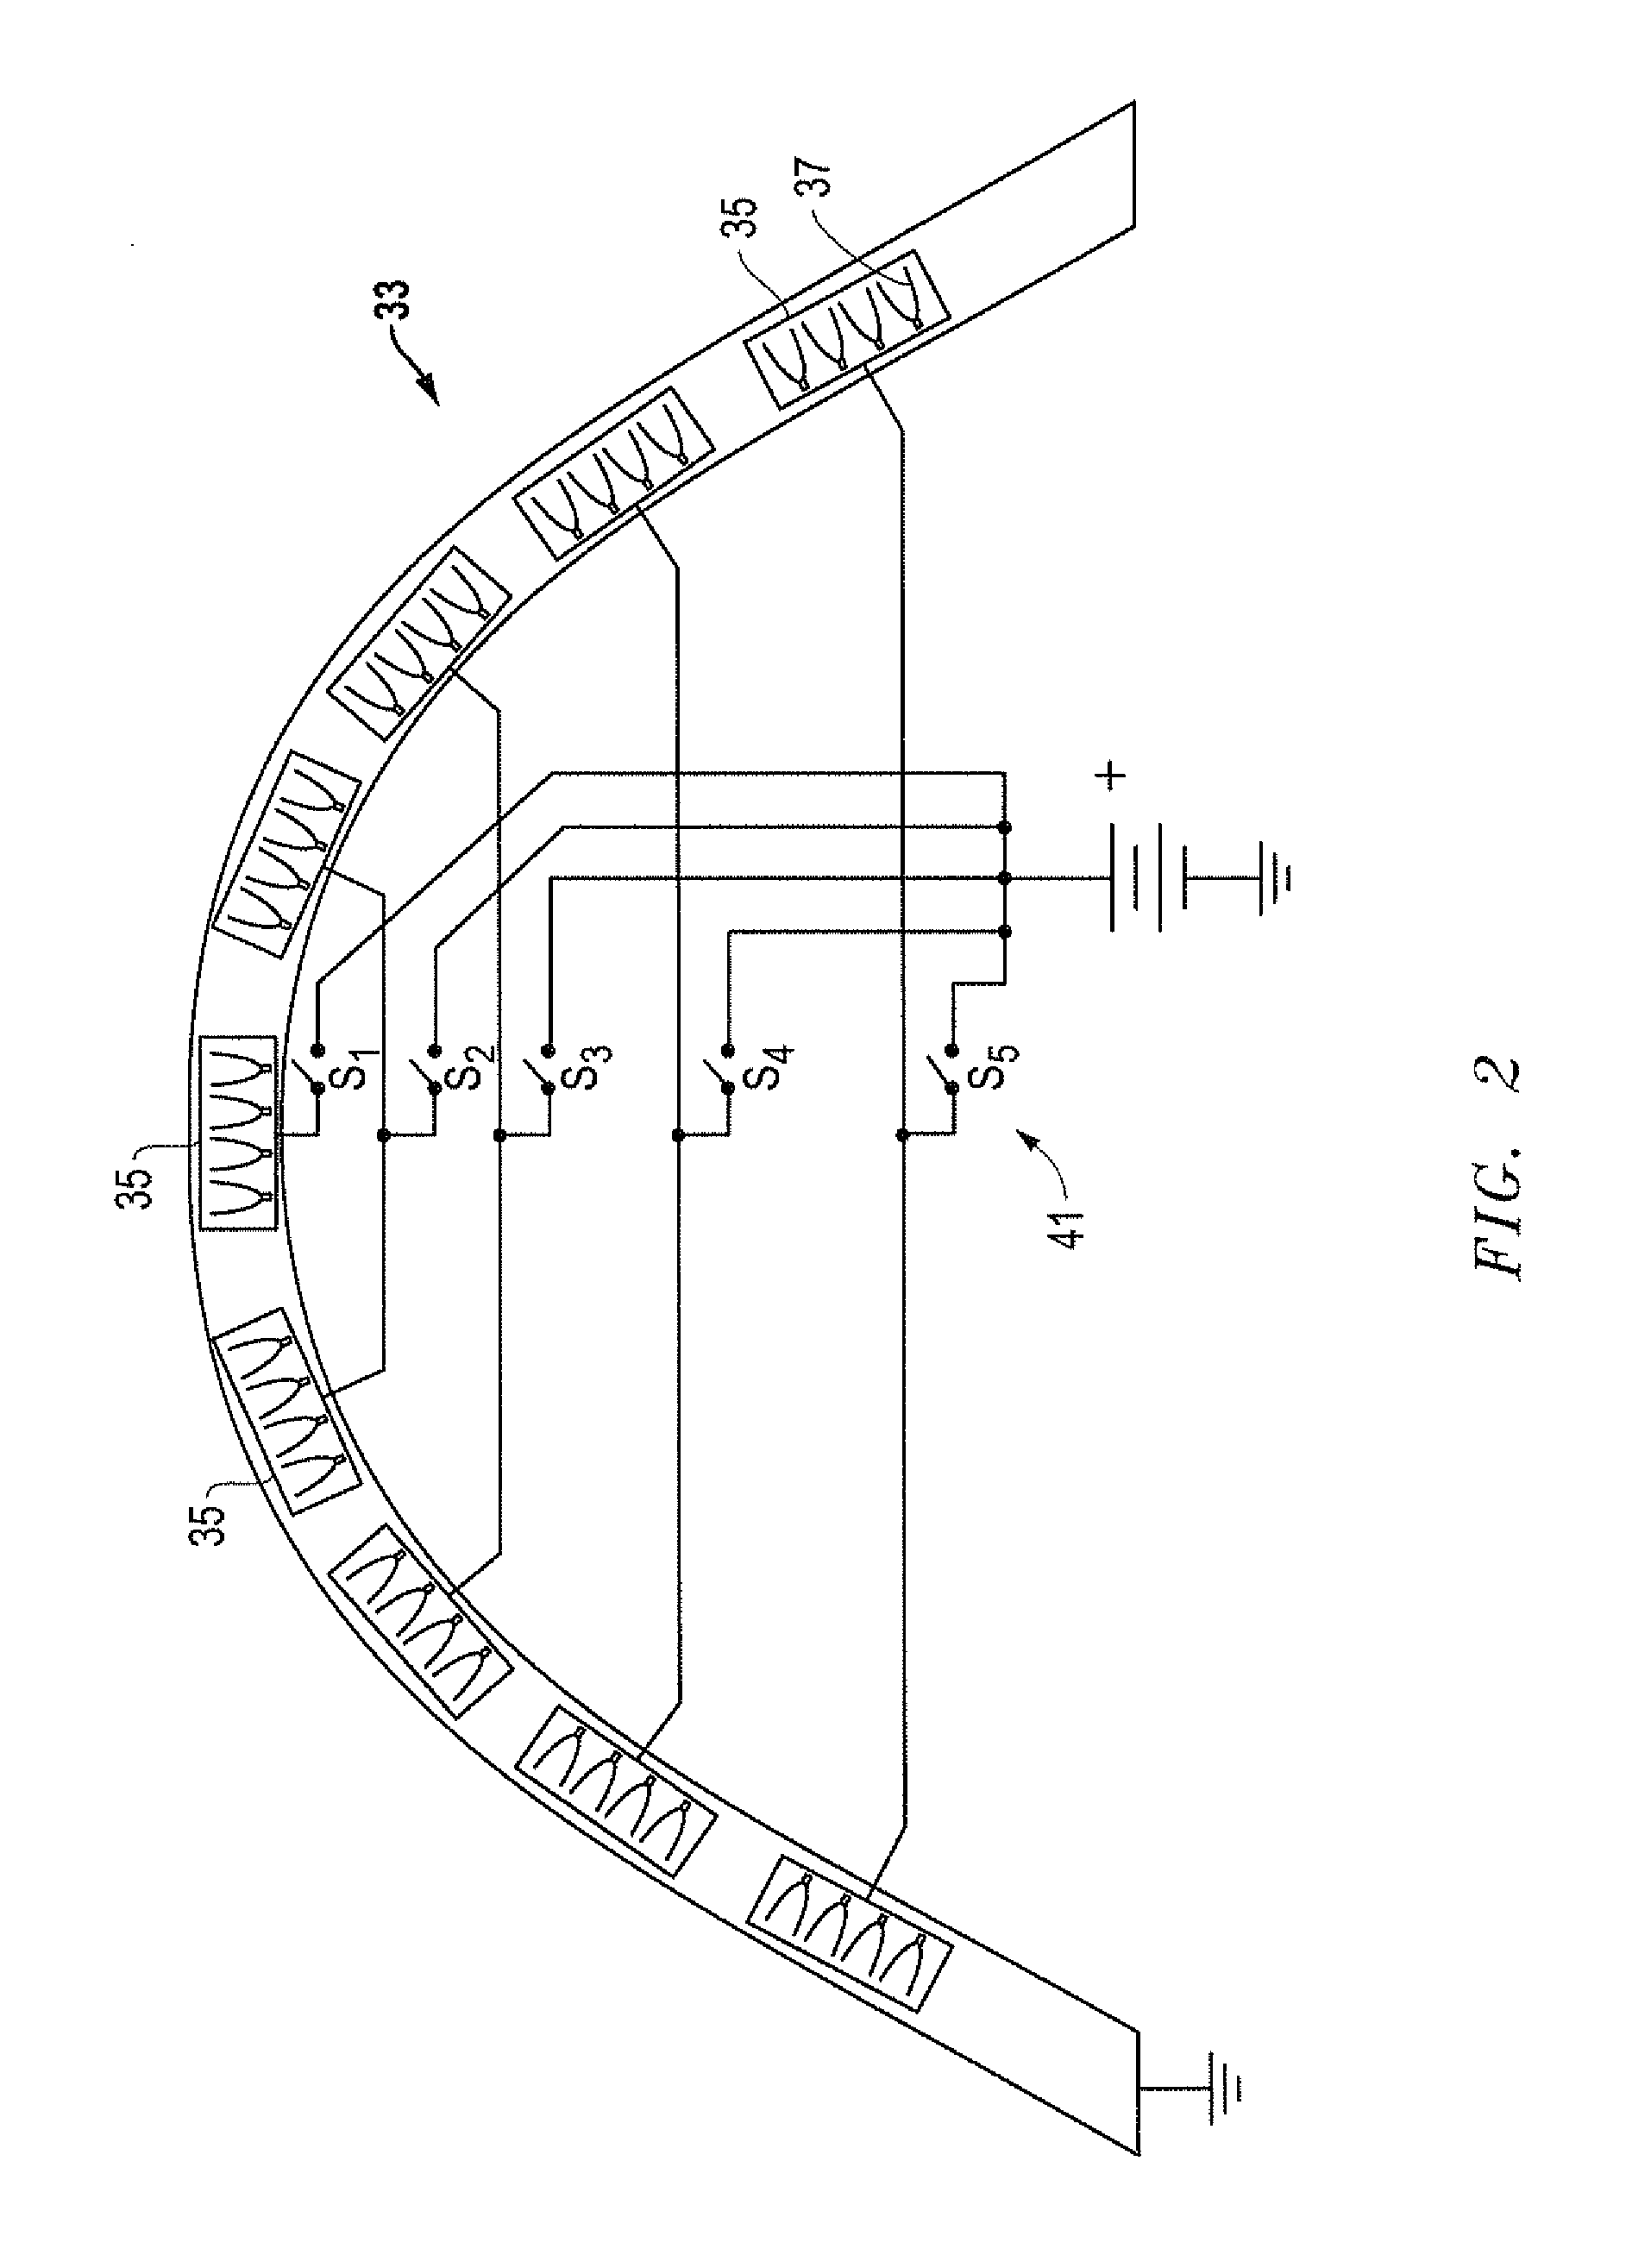 System, method and apparatus for windblast reduction during release or ejection from aircraft